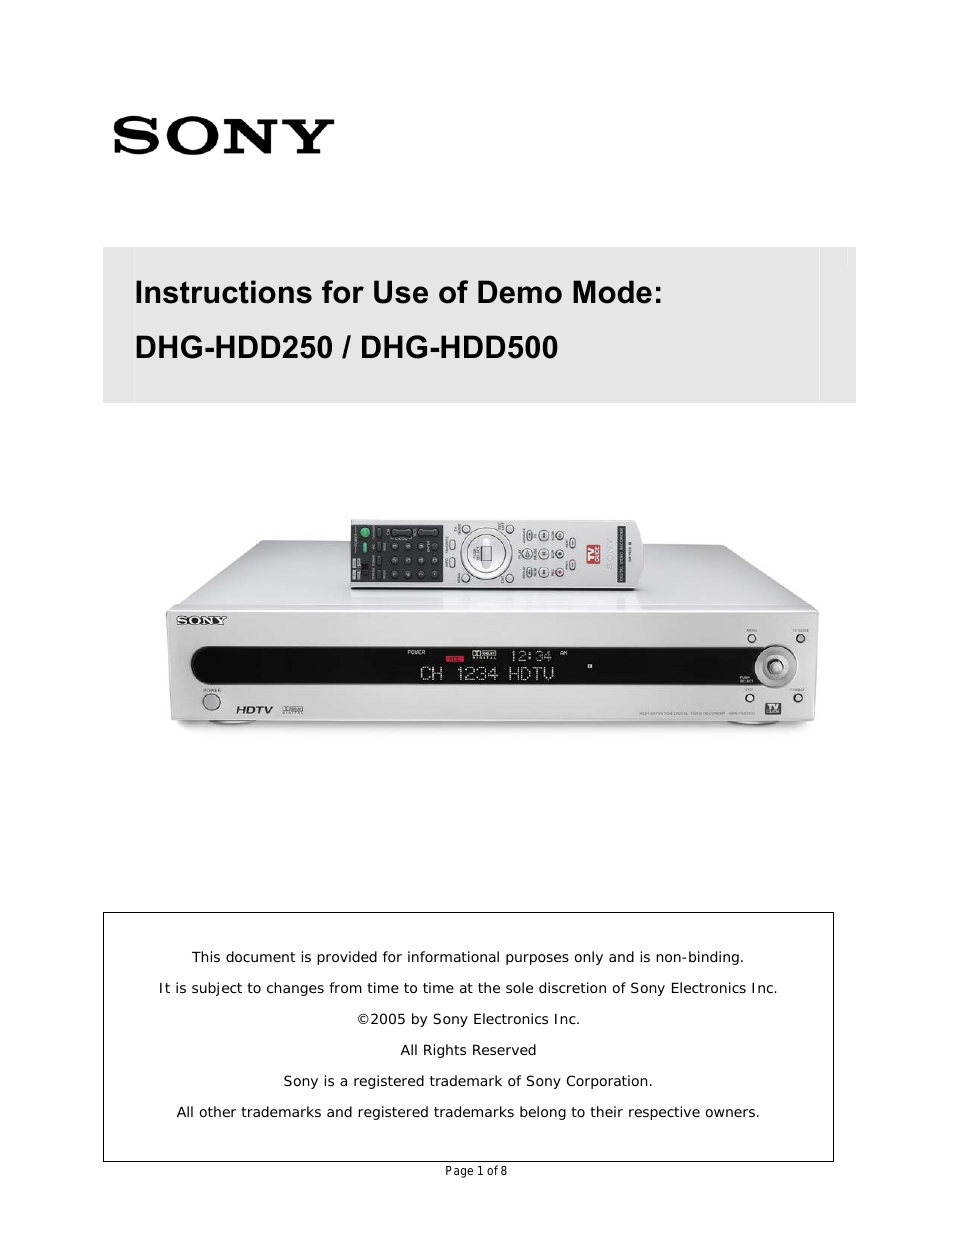 DHG-HDD500